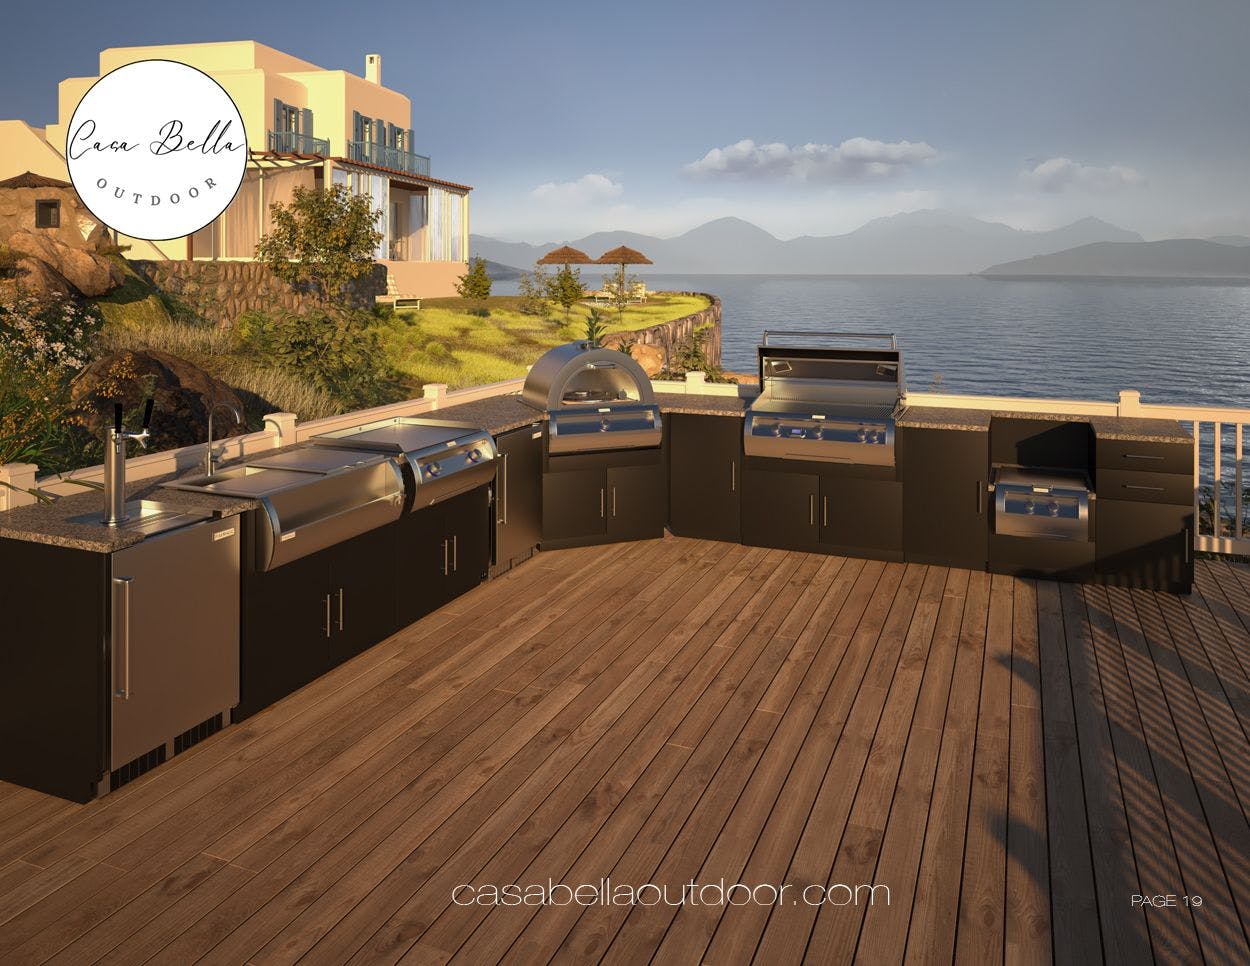 Do You Need an Outdoor Kitchen?